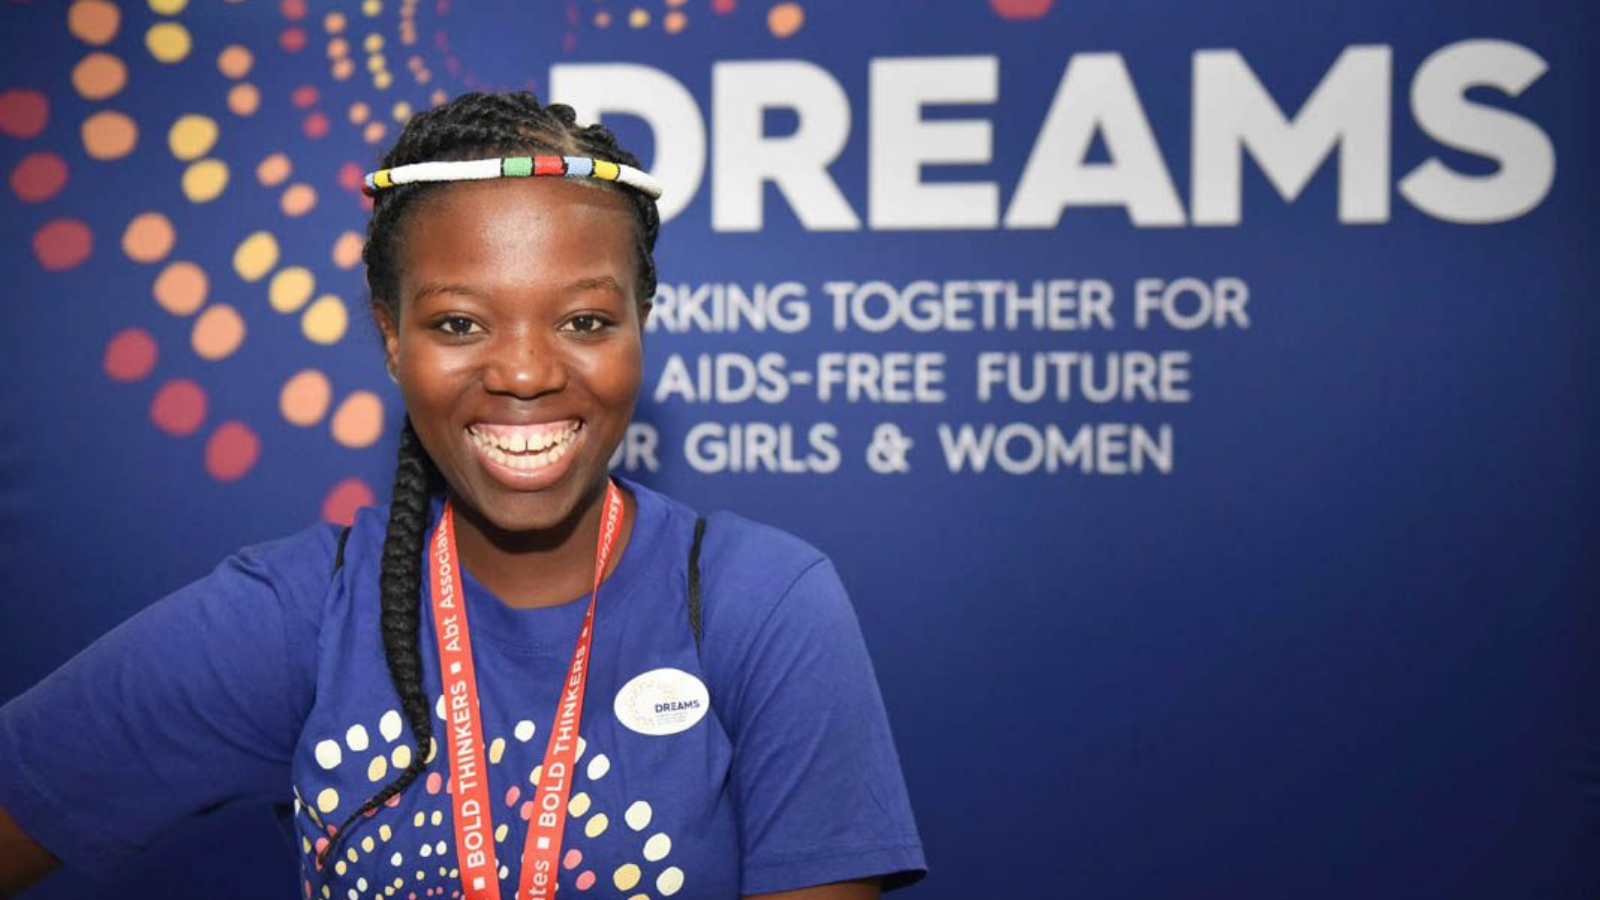 A DREAMS (Determined, Resilient, Empowered, AIDS-free, Mentored, and Safe) Ambassador working toward a brighter future. (Photo courtesy of PEPFAR)